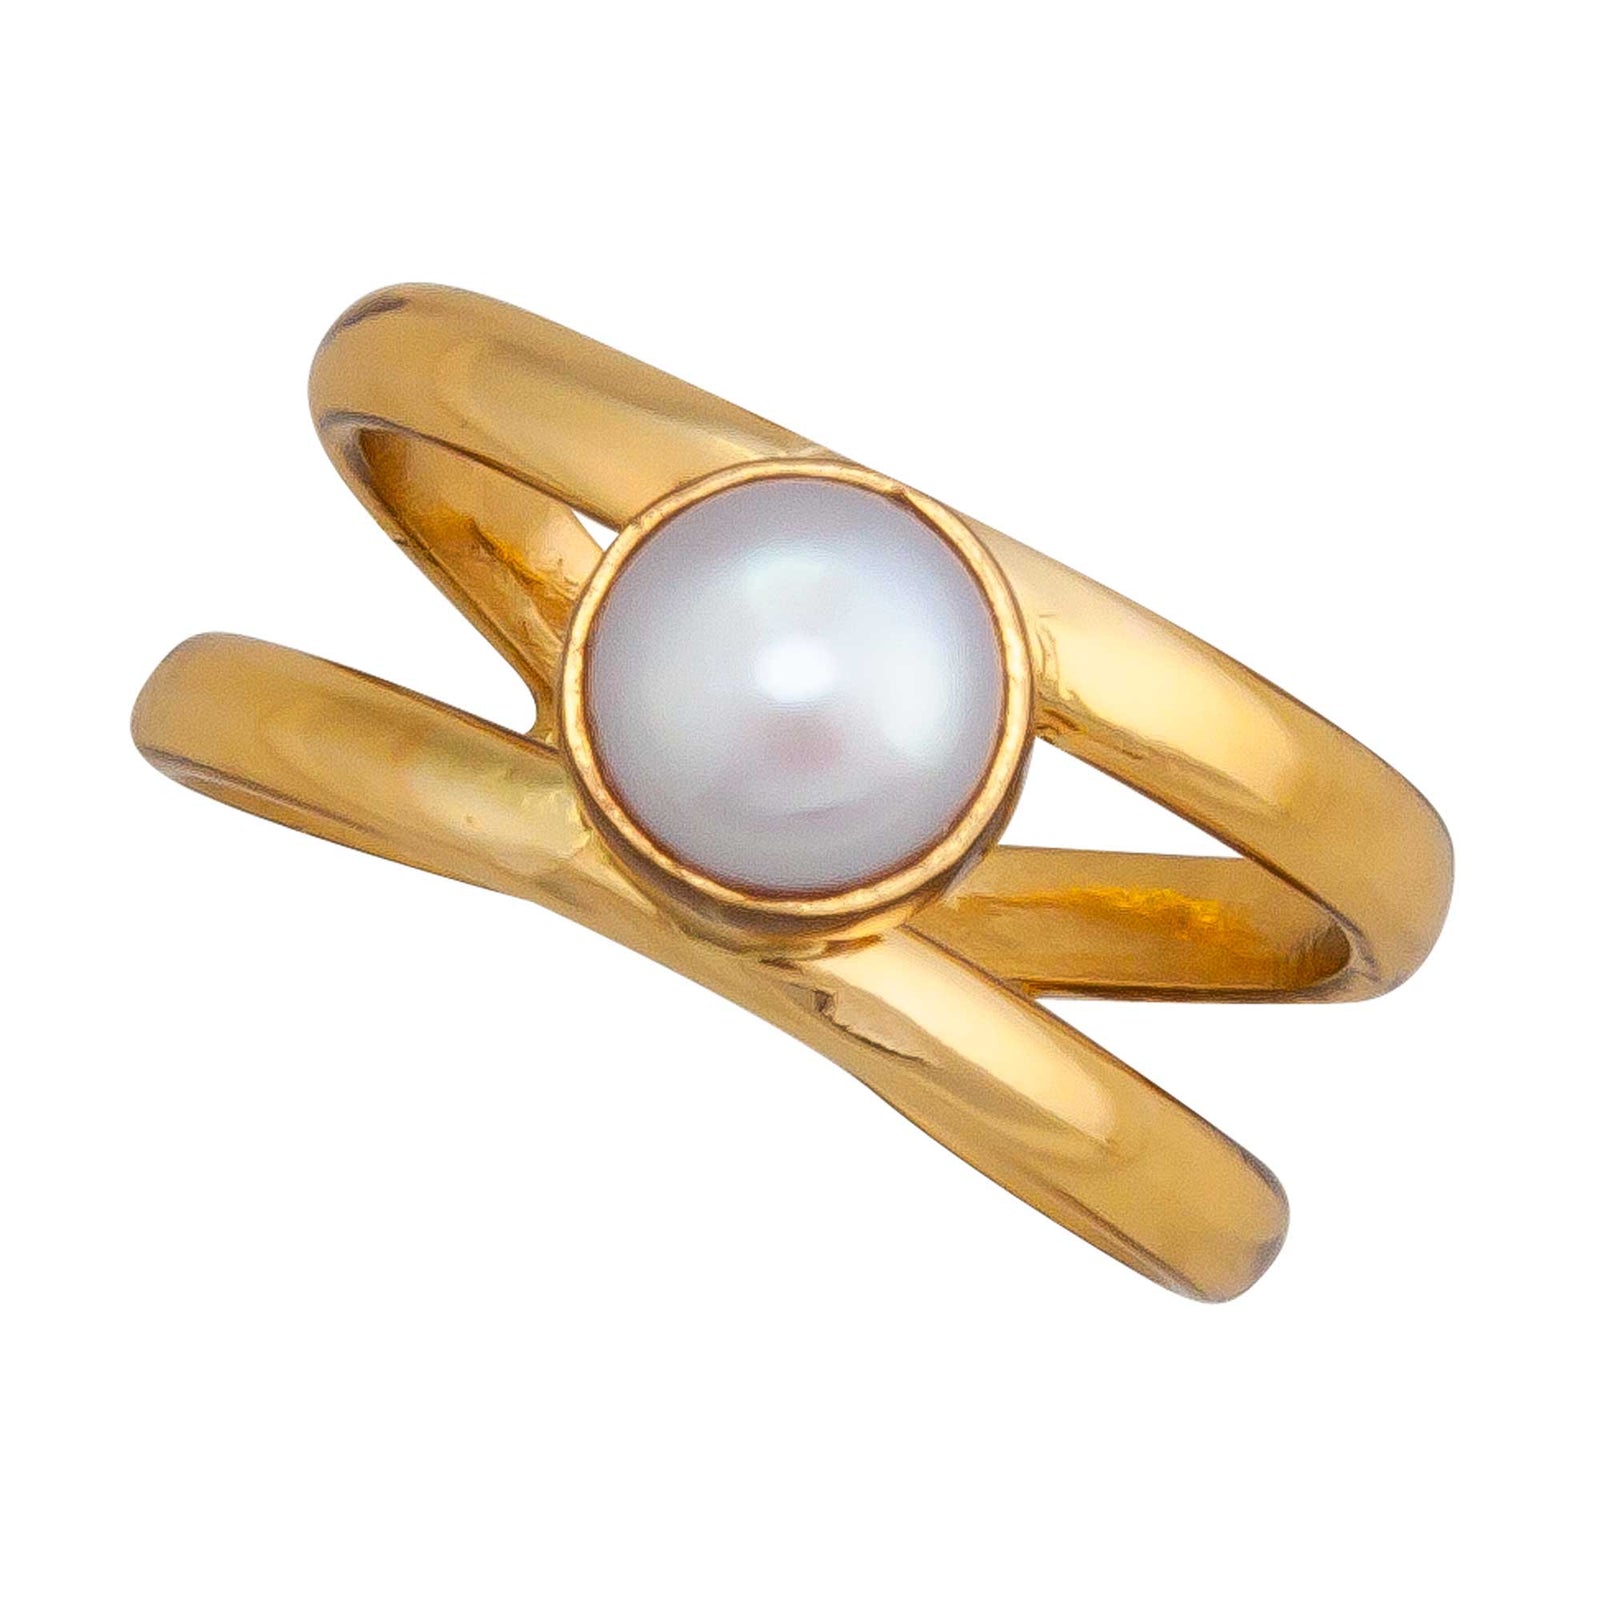 Alchemia Pearl Double Band Adjustable Ring | Charles Albert Jewelry